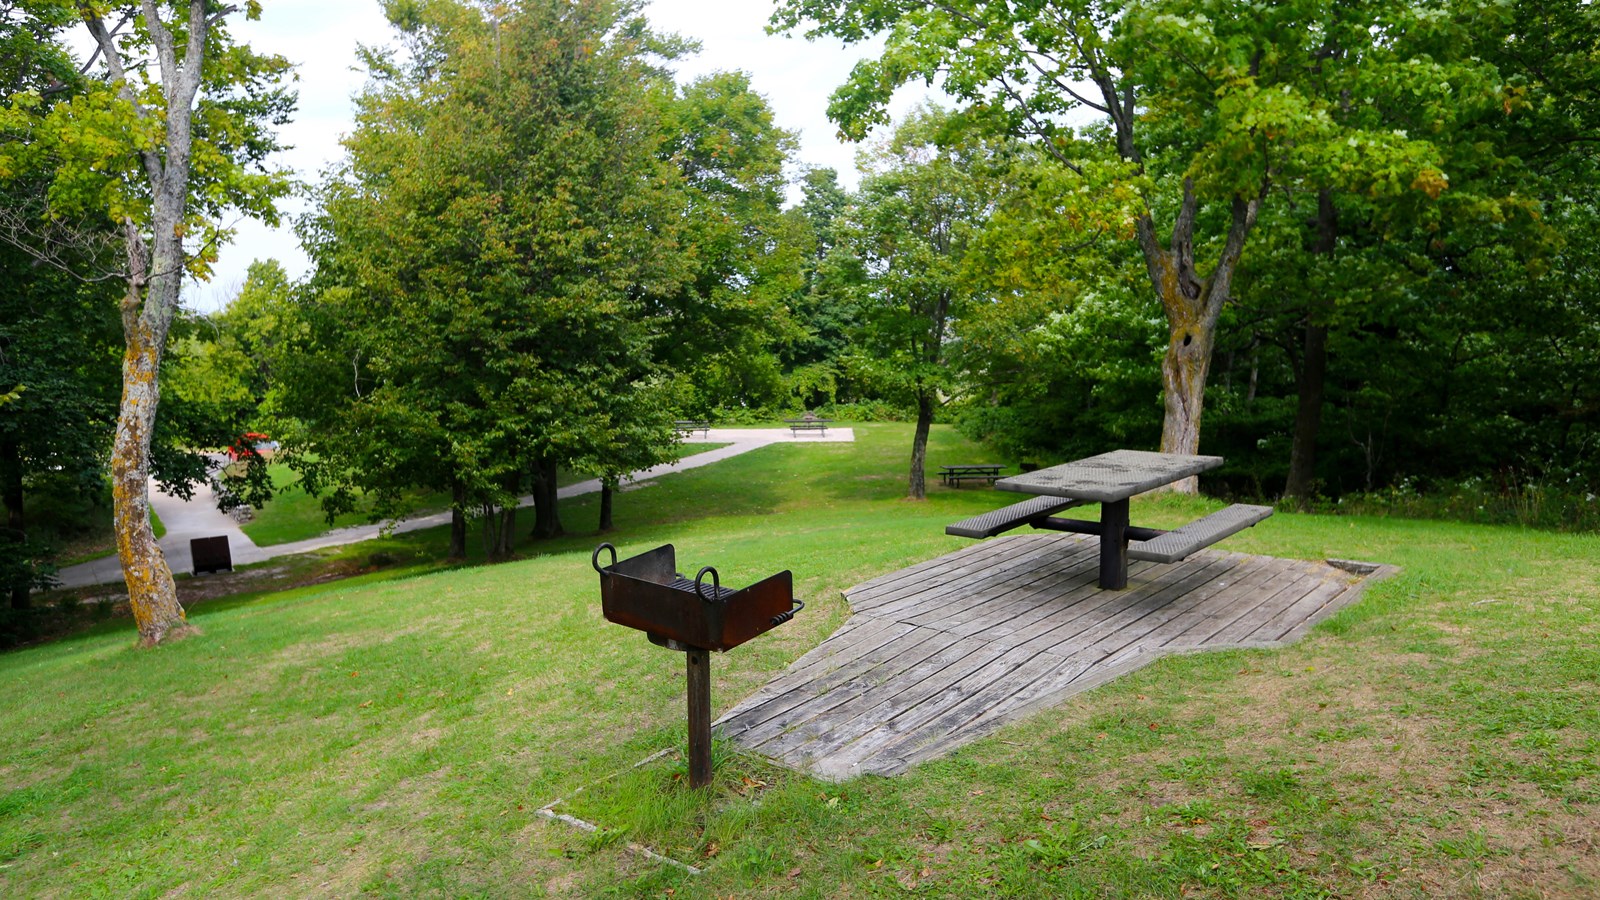 Wooden deck with accessible picnic table and grill surrounded by green lawn and dark green trees